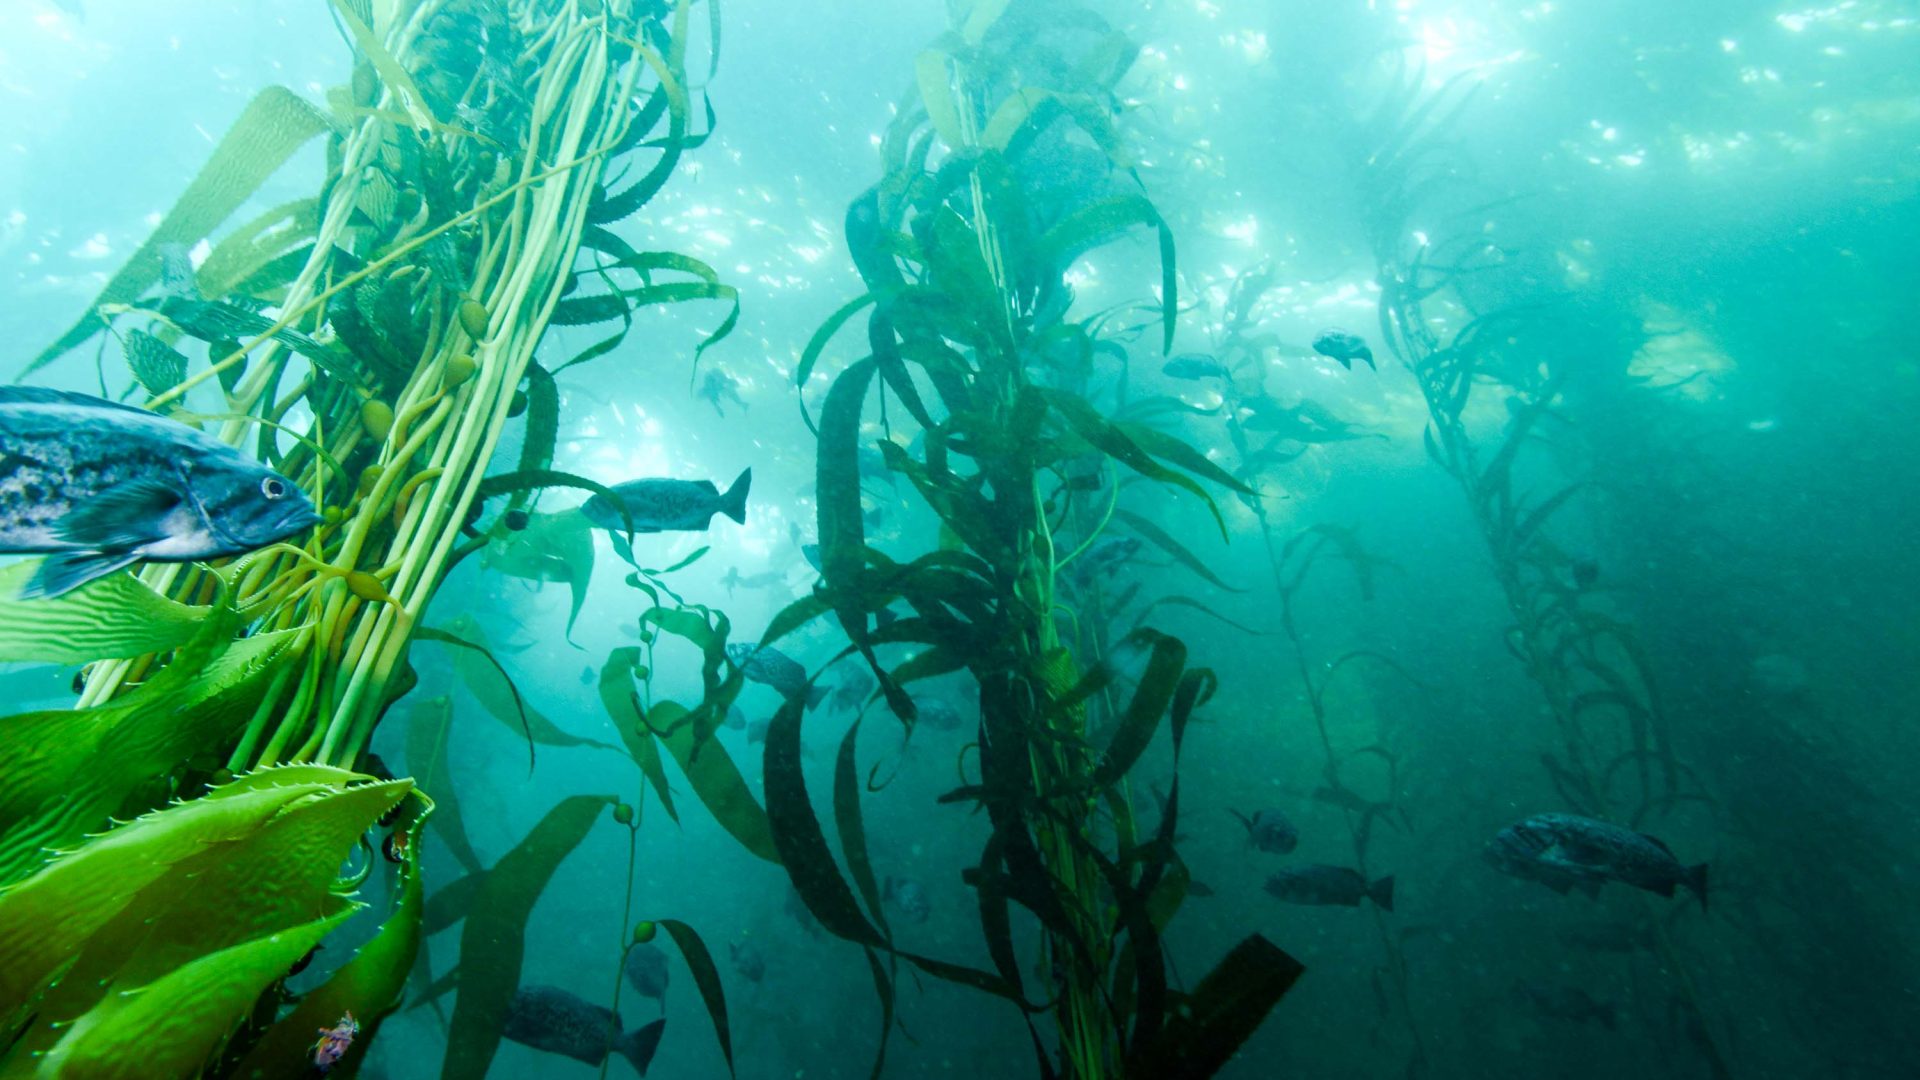 Kelp forest and fish swimming by.